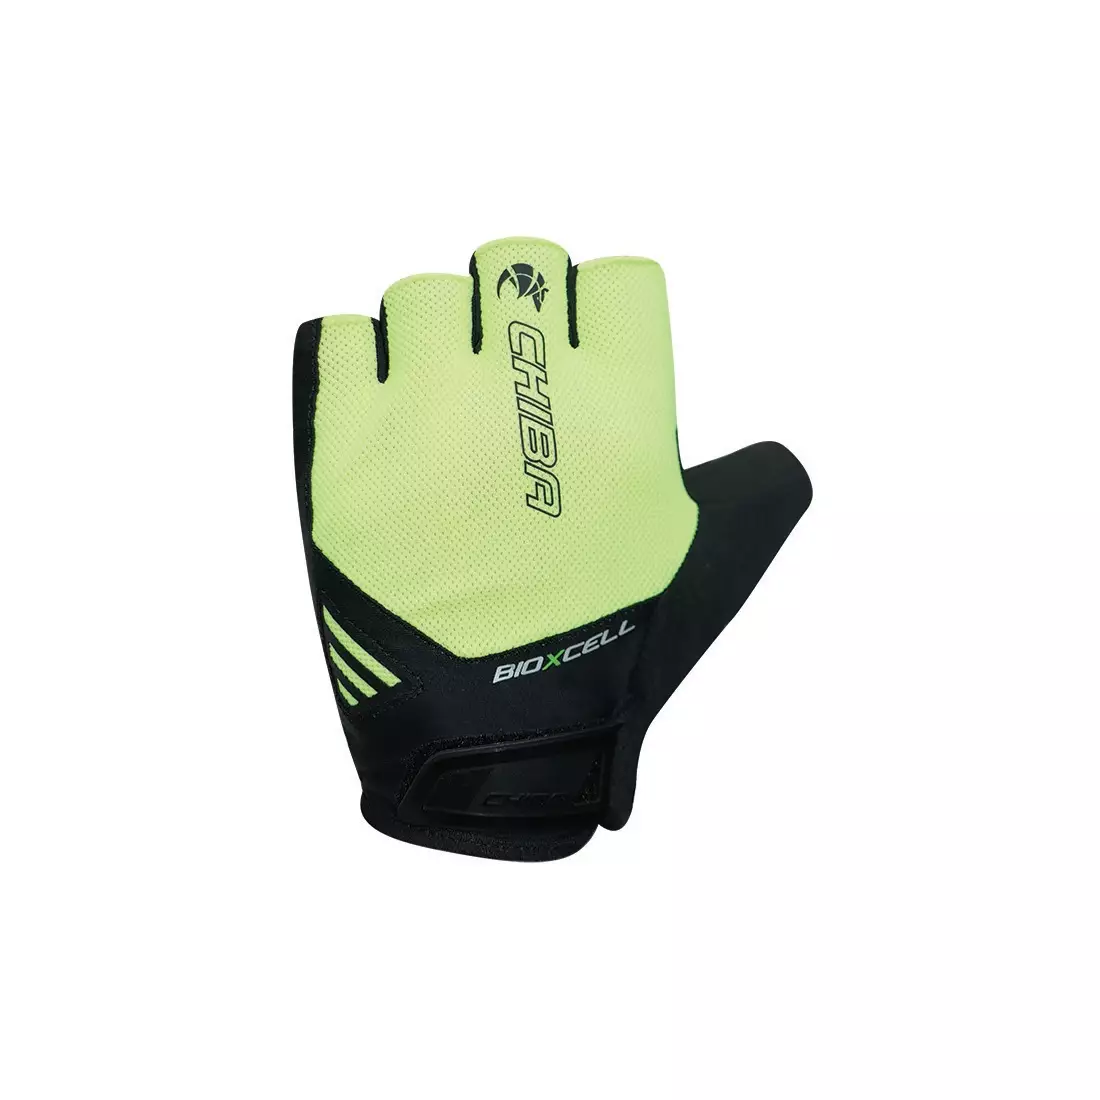 CHIBA bicycle gloves BIOXCELL AIR neon yellow 3060820